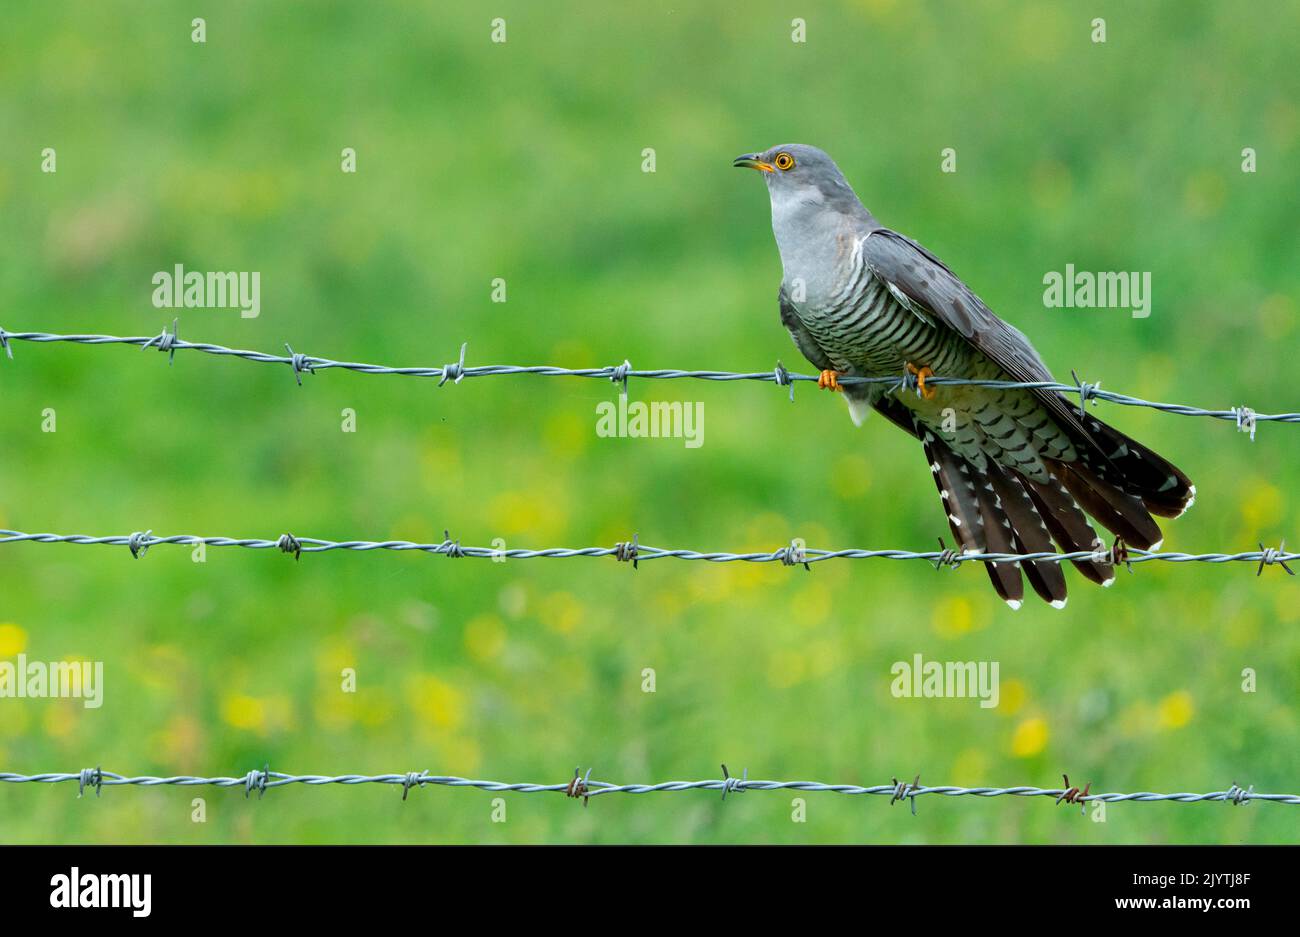 Cuckoo (Cuculus canorus) perched on a barbed wire, England Stock Photo